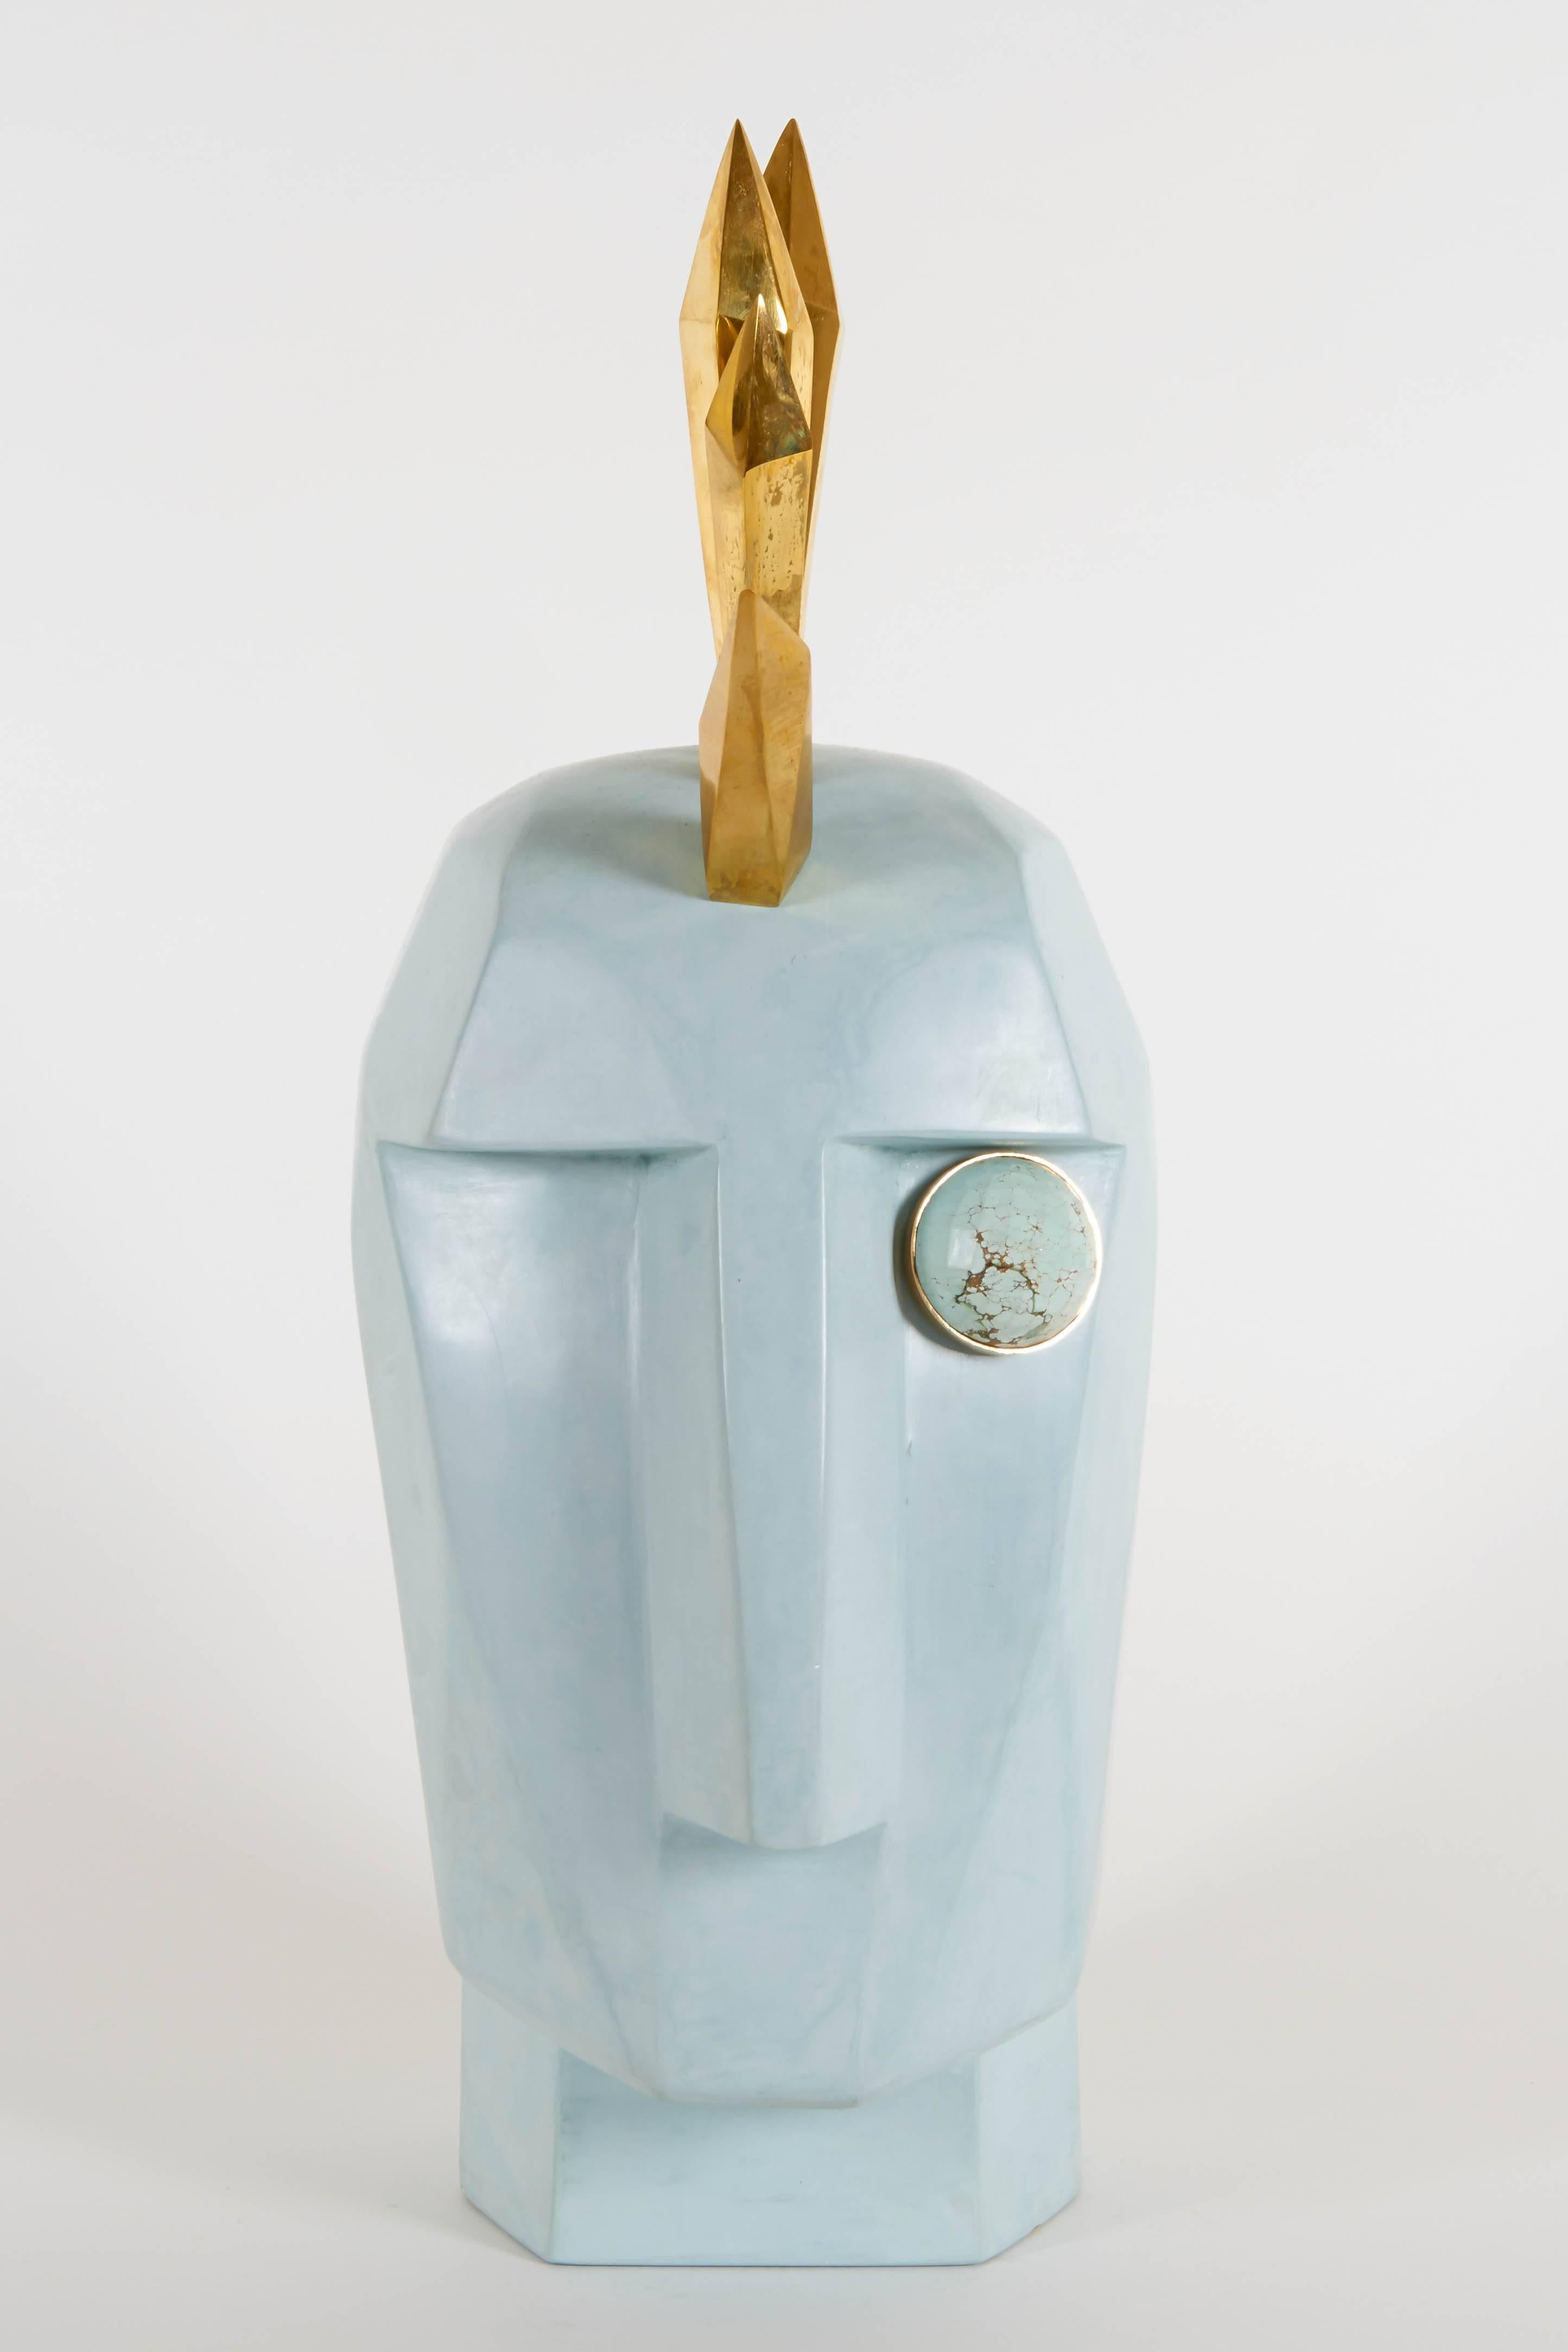 American Kelly Wearstler, Faceted Spike and Eye Head Trip Sculpture For Sale